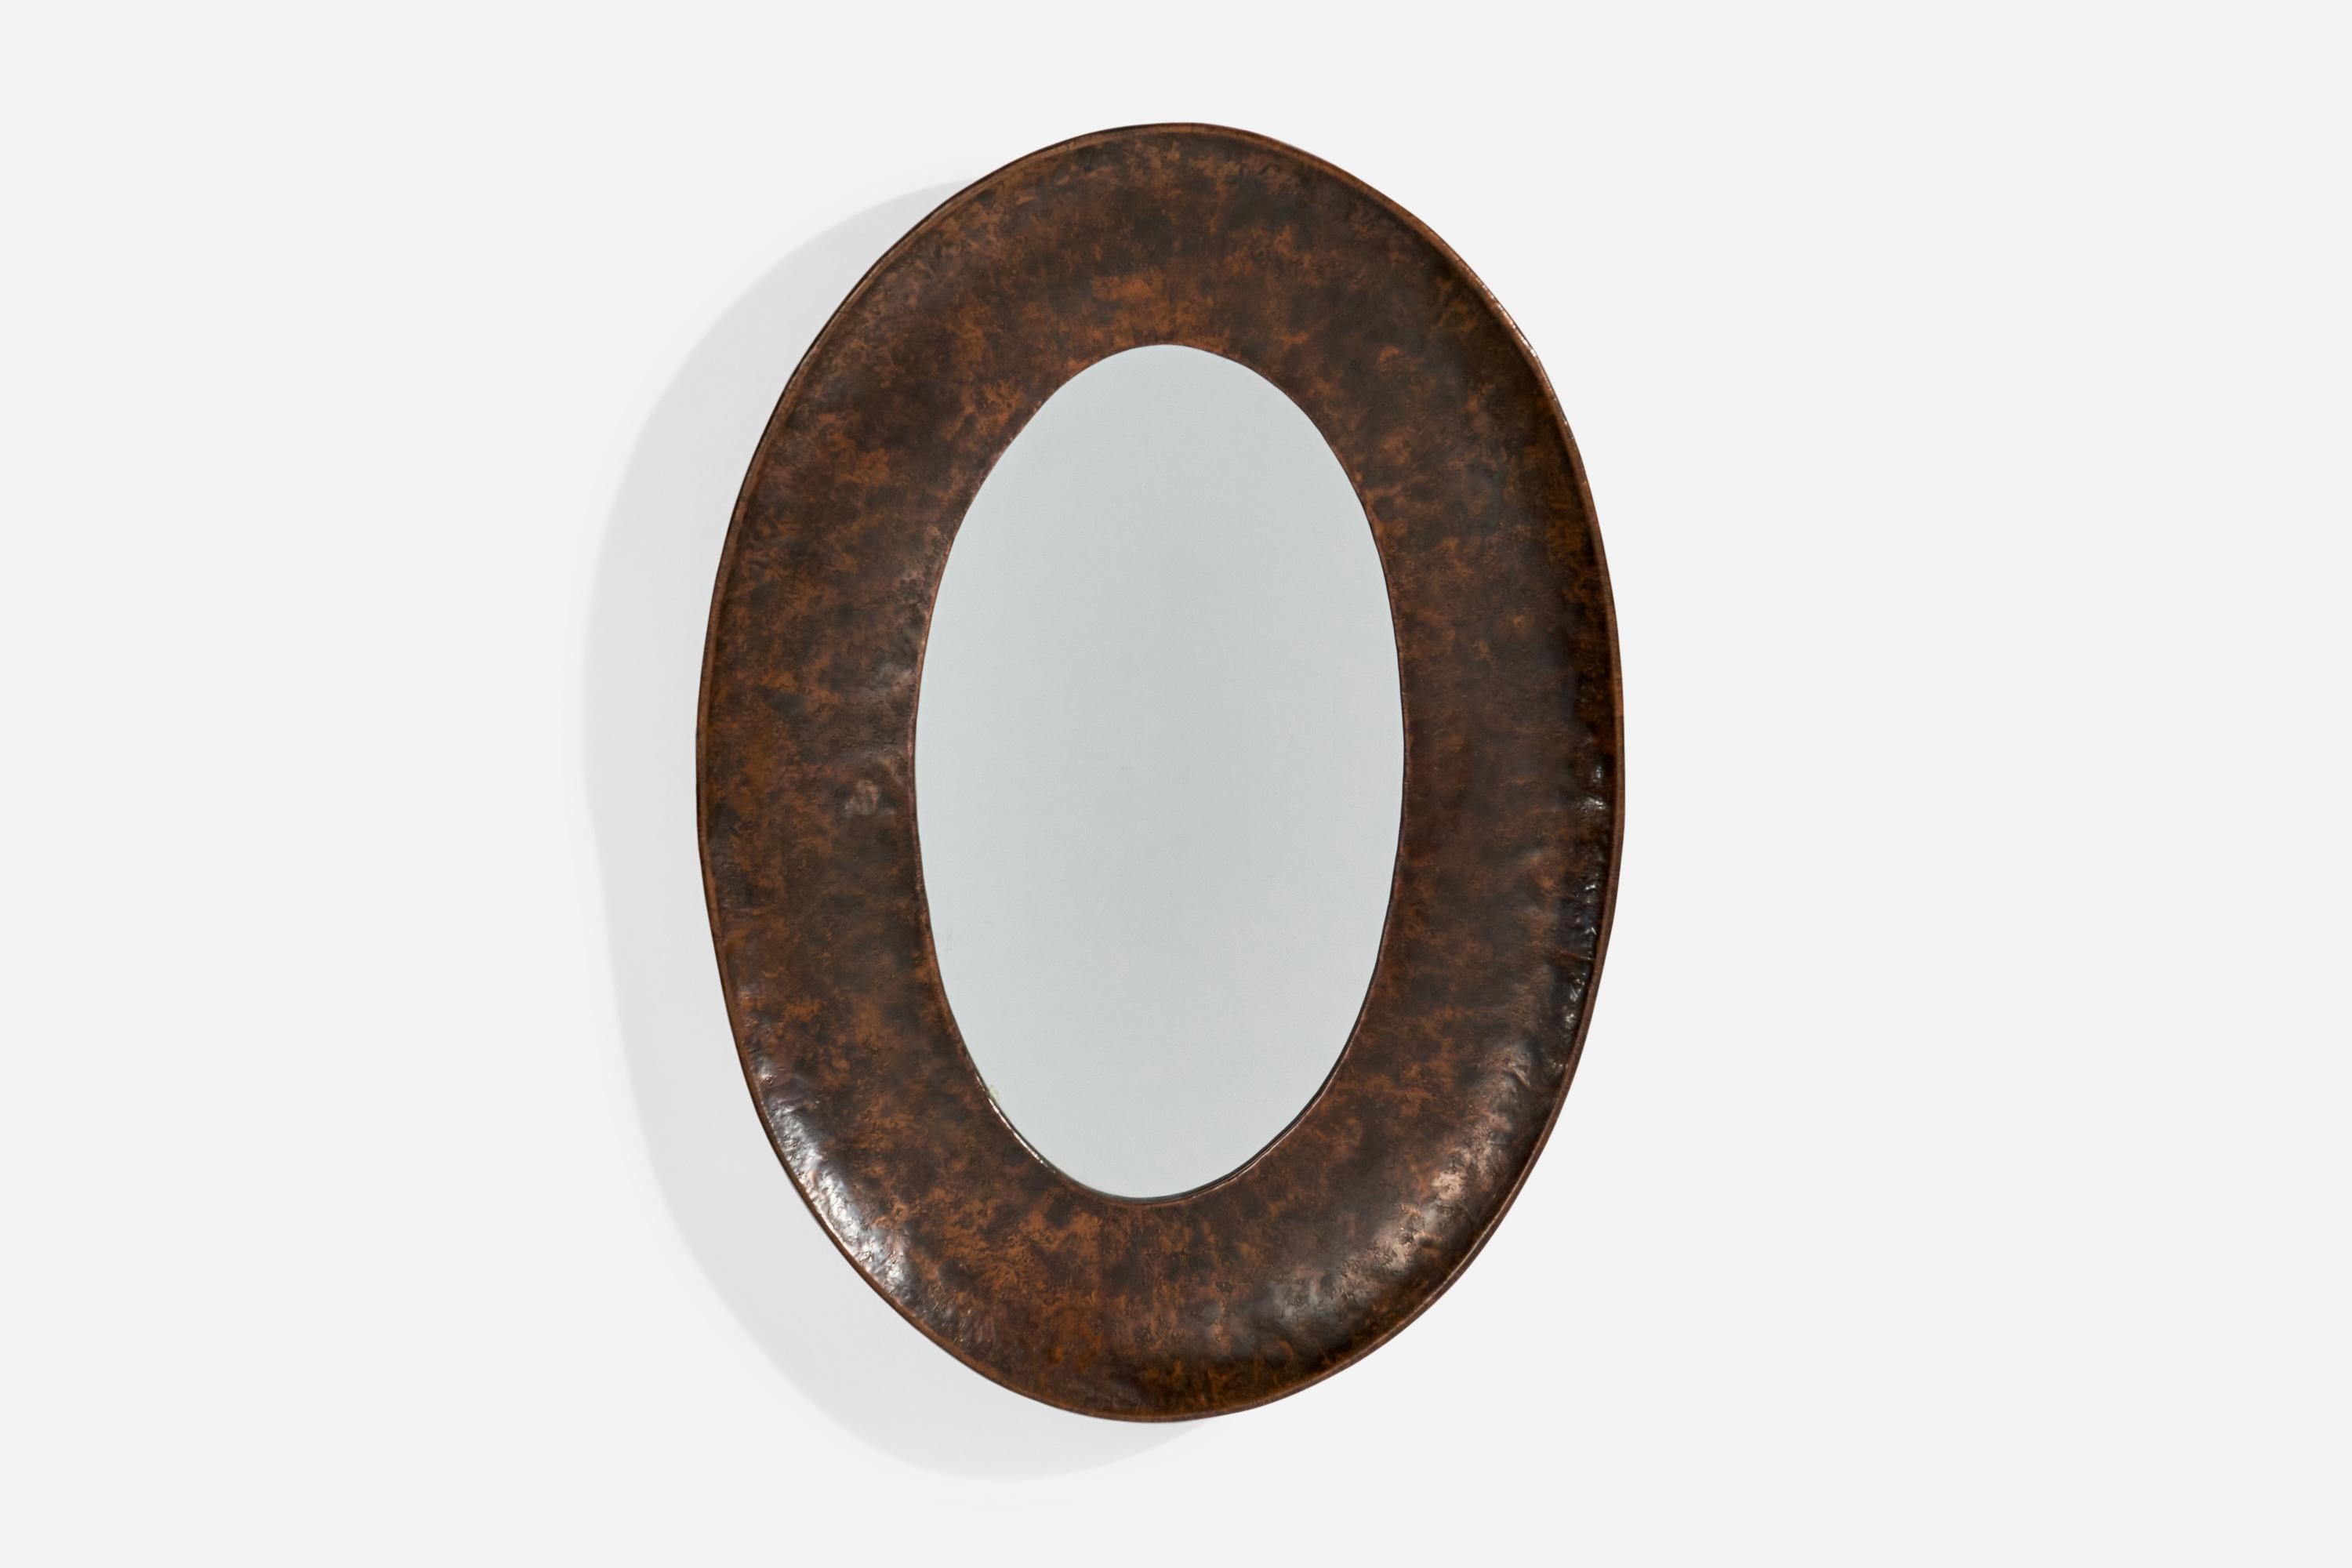 A patinated and hammered copper wall mirror, designed and produced by Angelo Bragalini, Italy, 1960s.